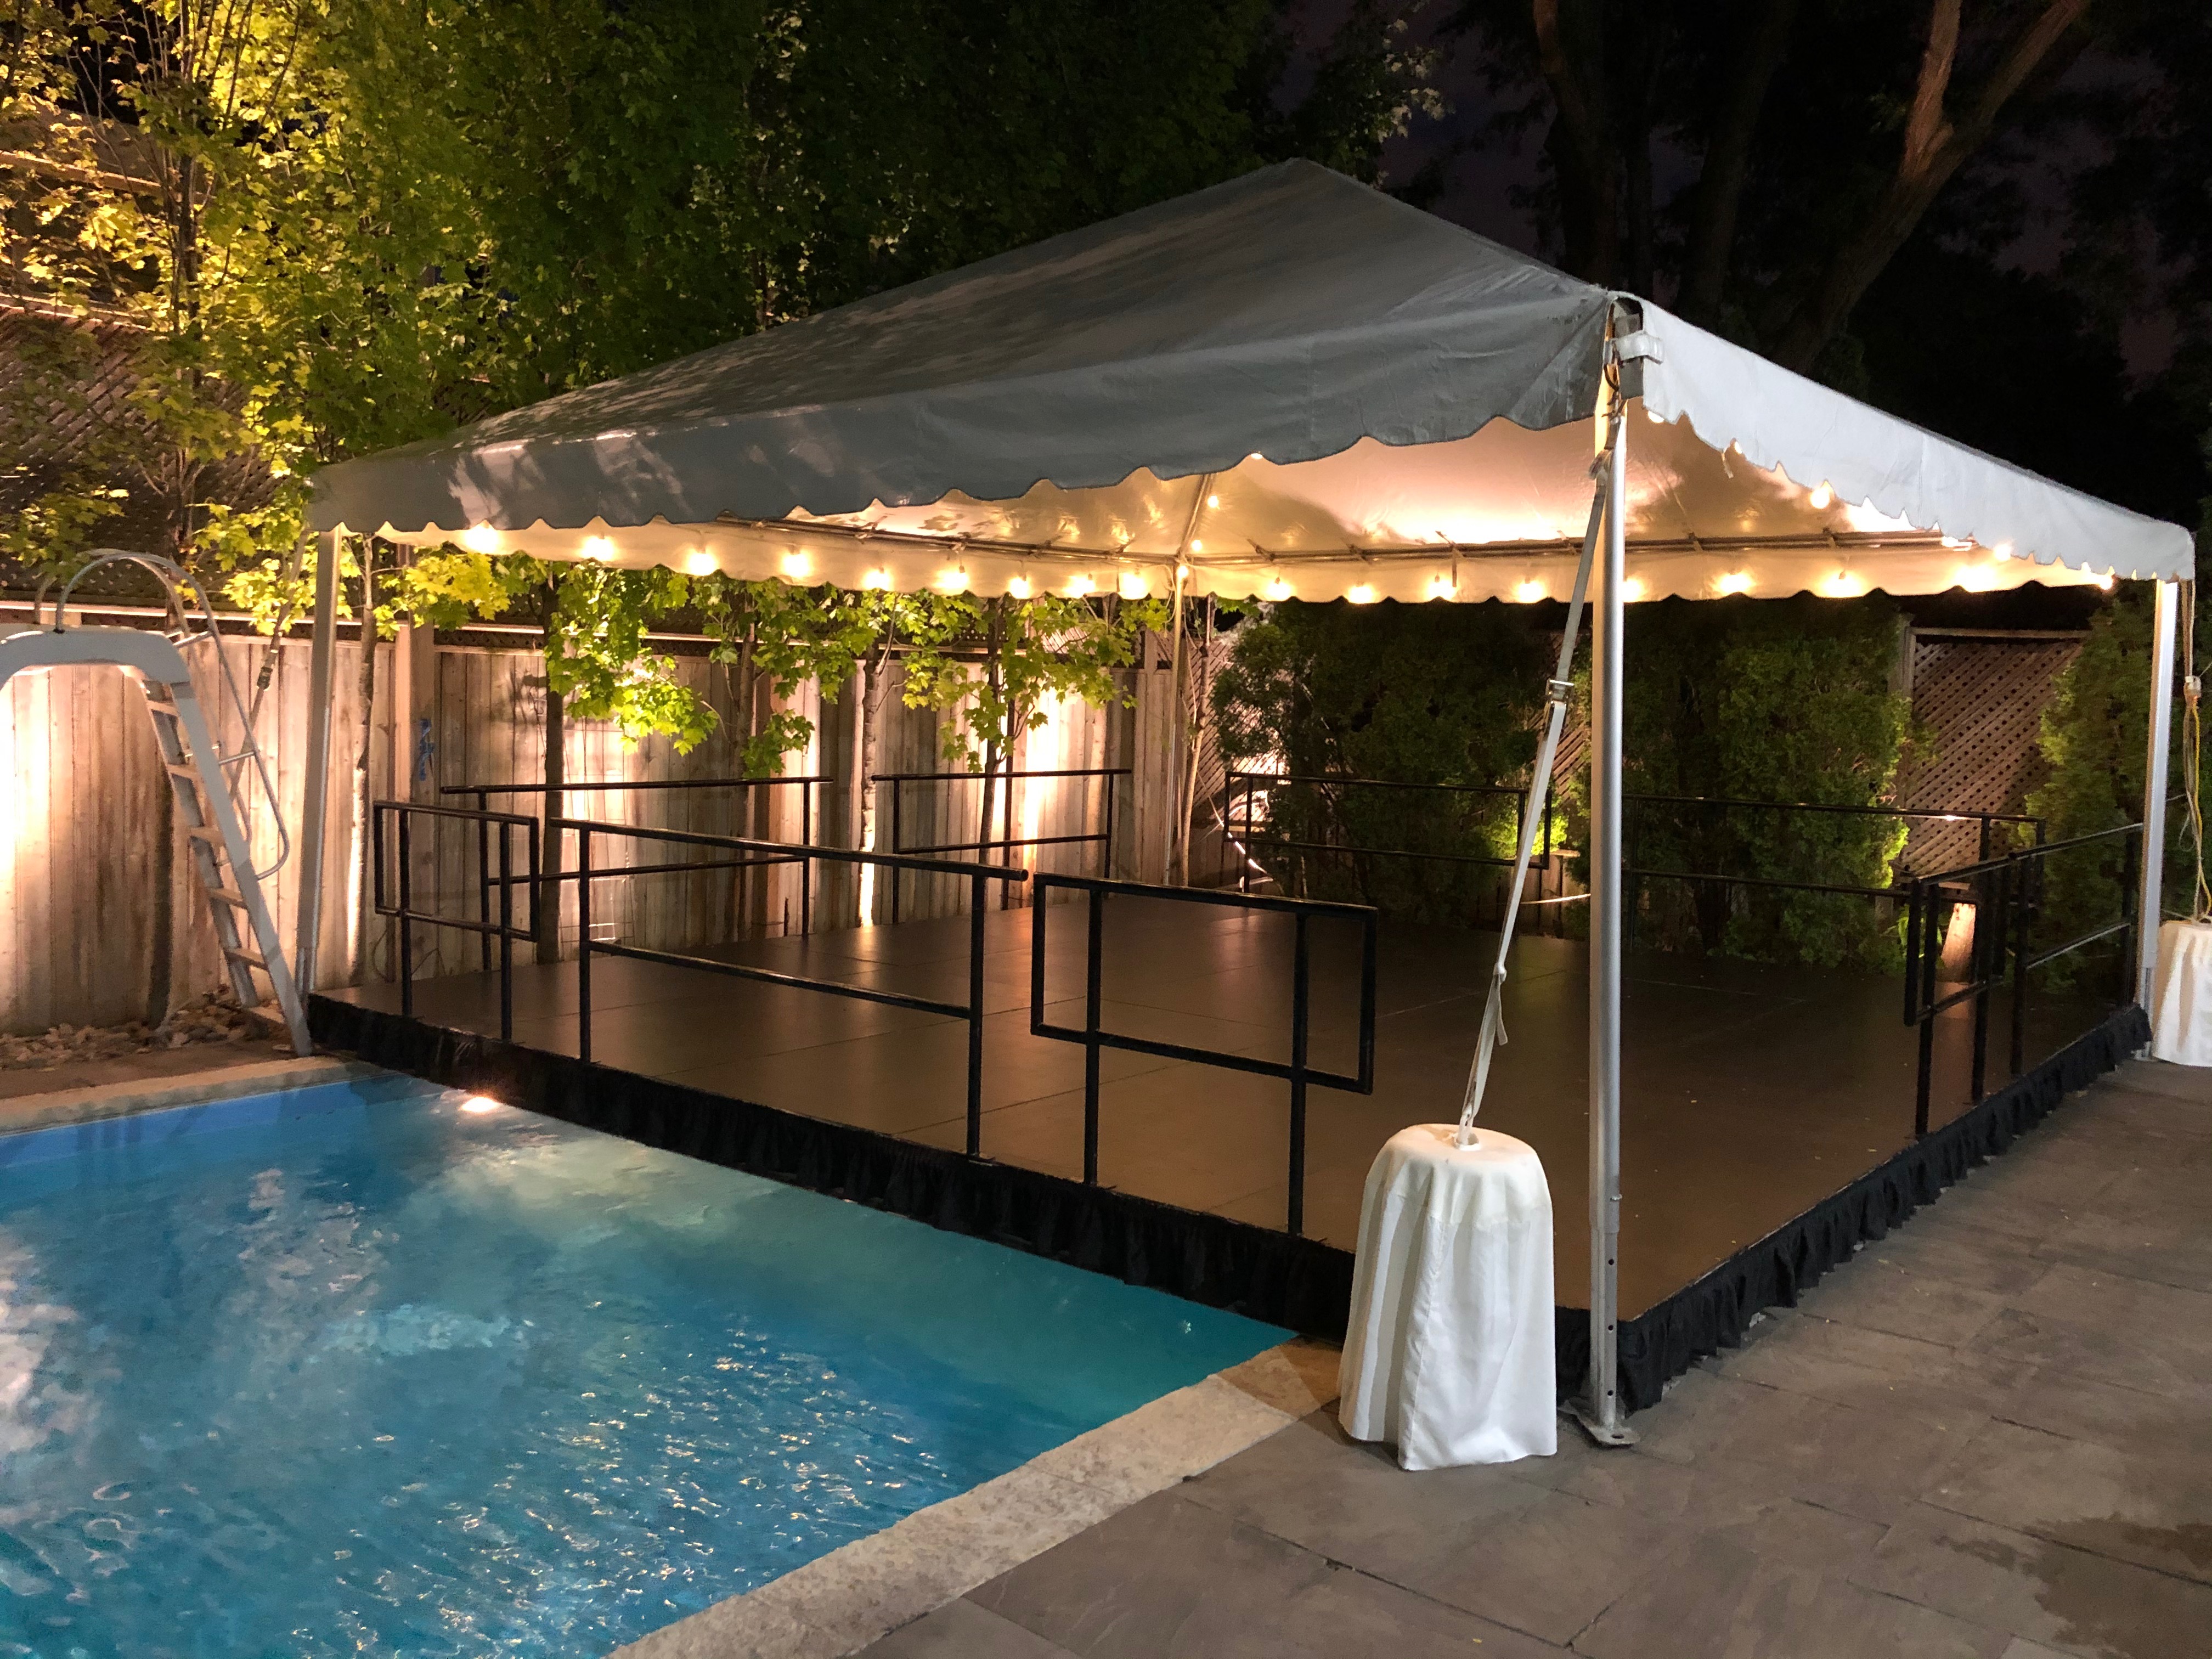 Pool Covering per square foot - Tent Separate Cost